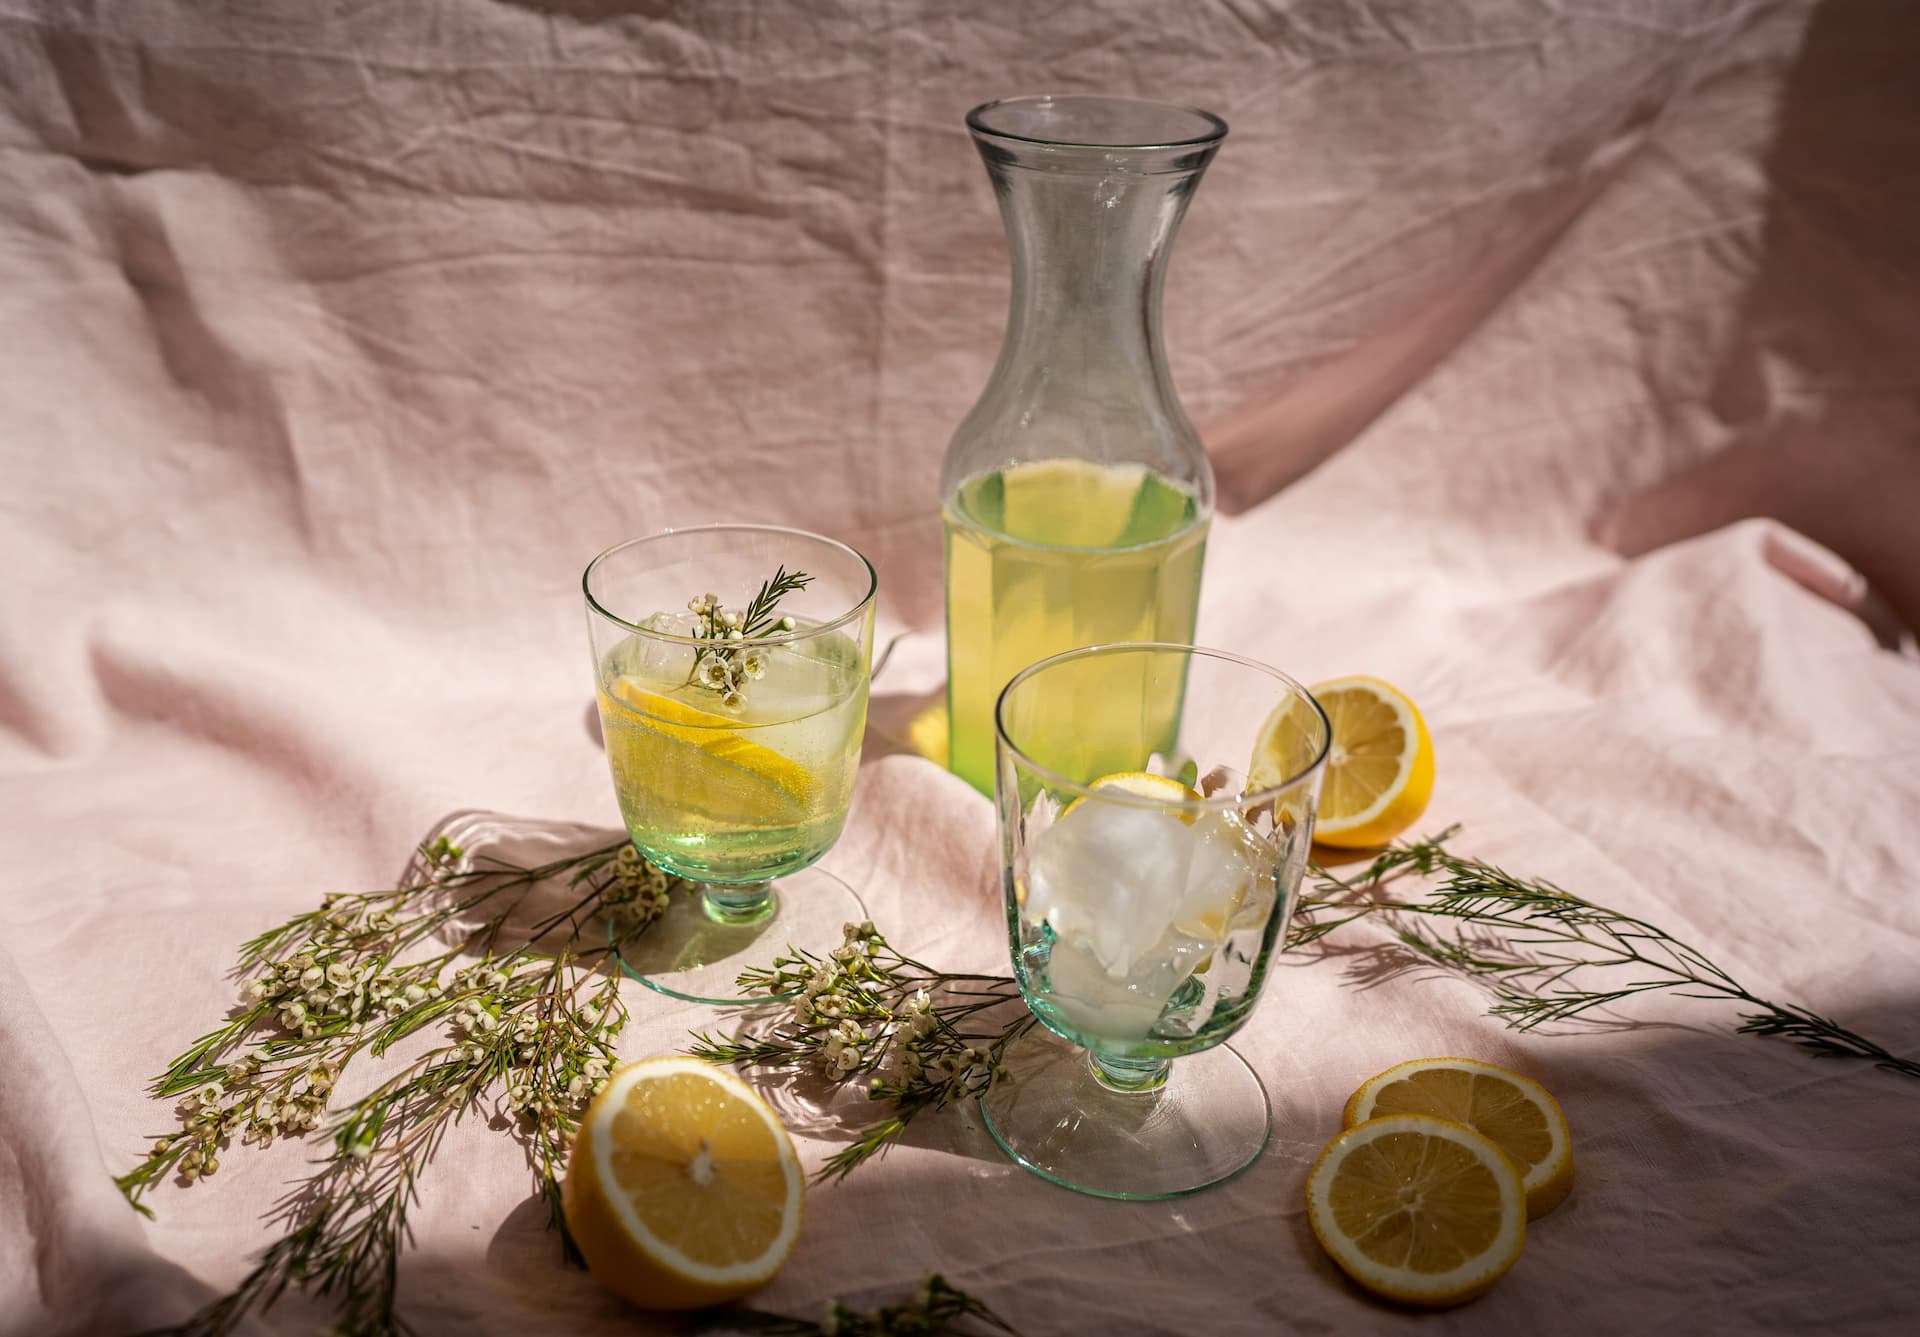 Nordic Cocktail Culture: Signature Drinks from Scandinavia